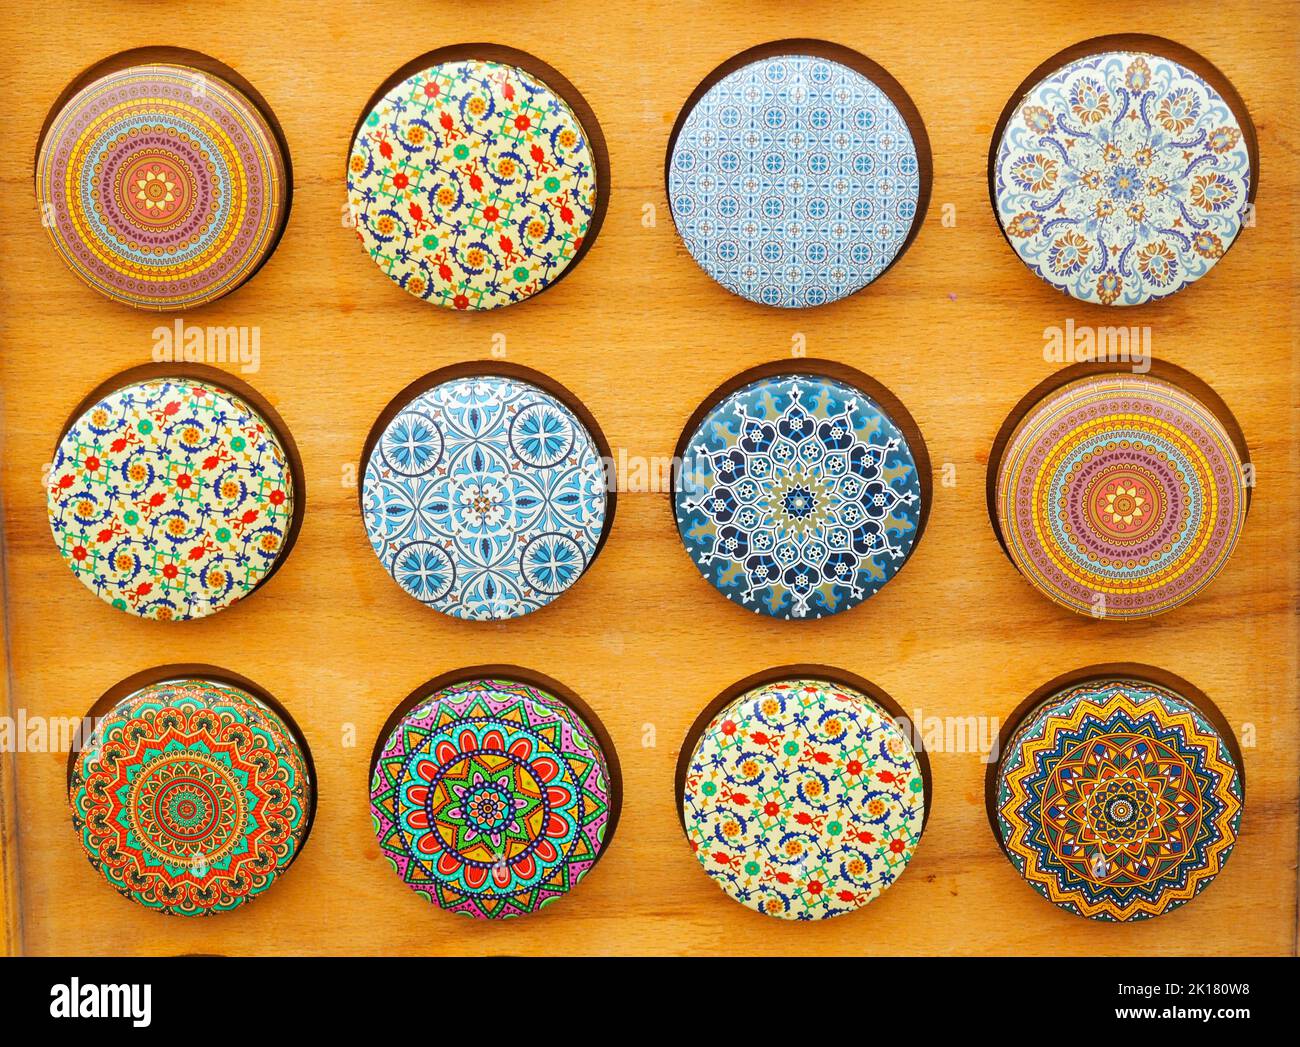 Small round boxes decorated in souvenir shops in Seville Stock Photo